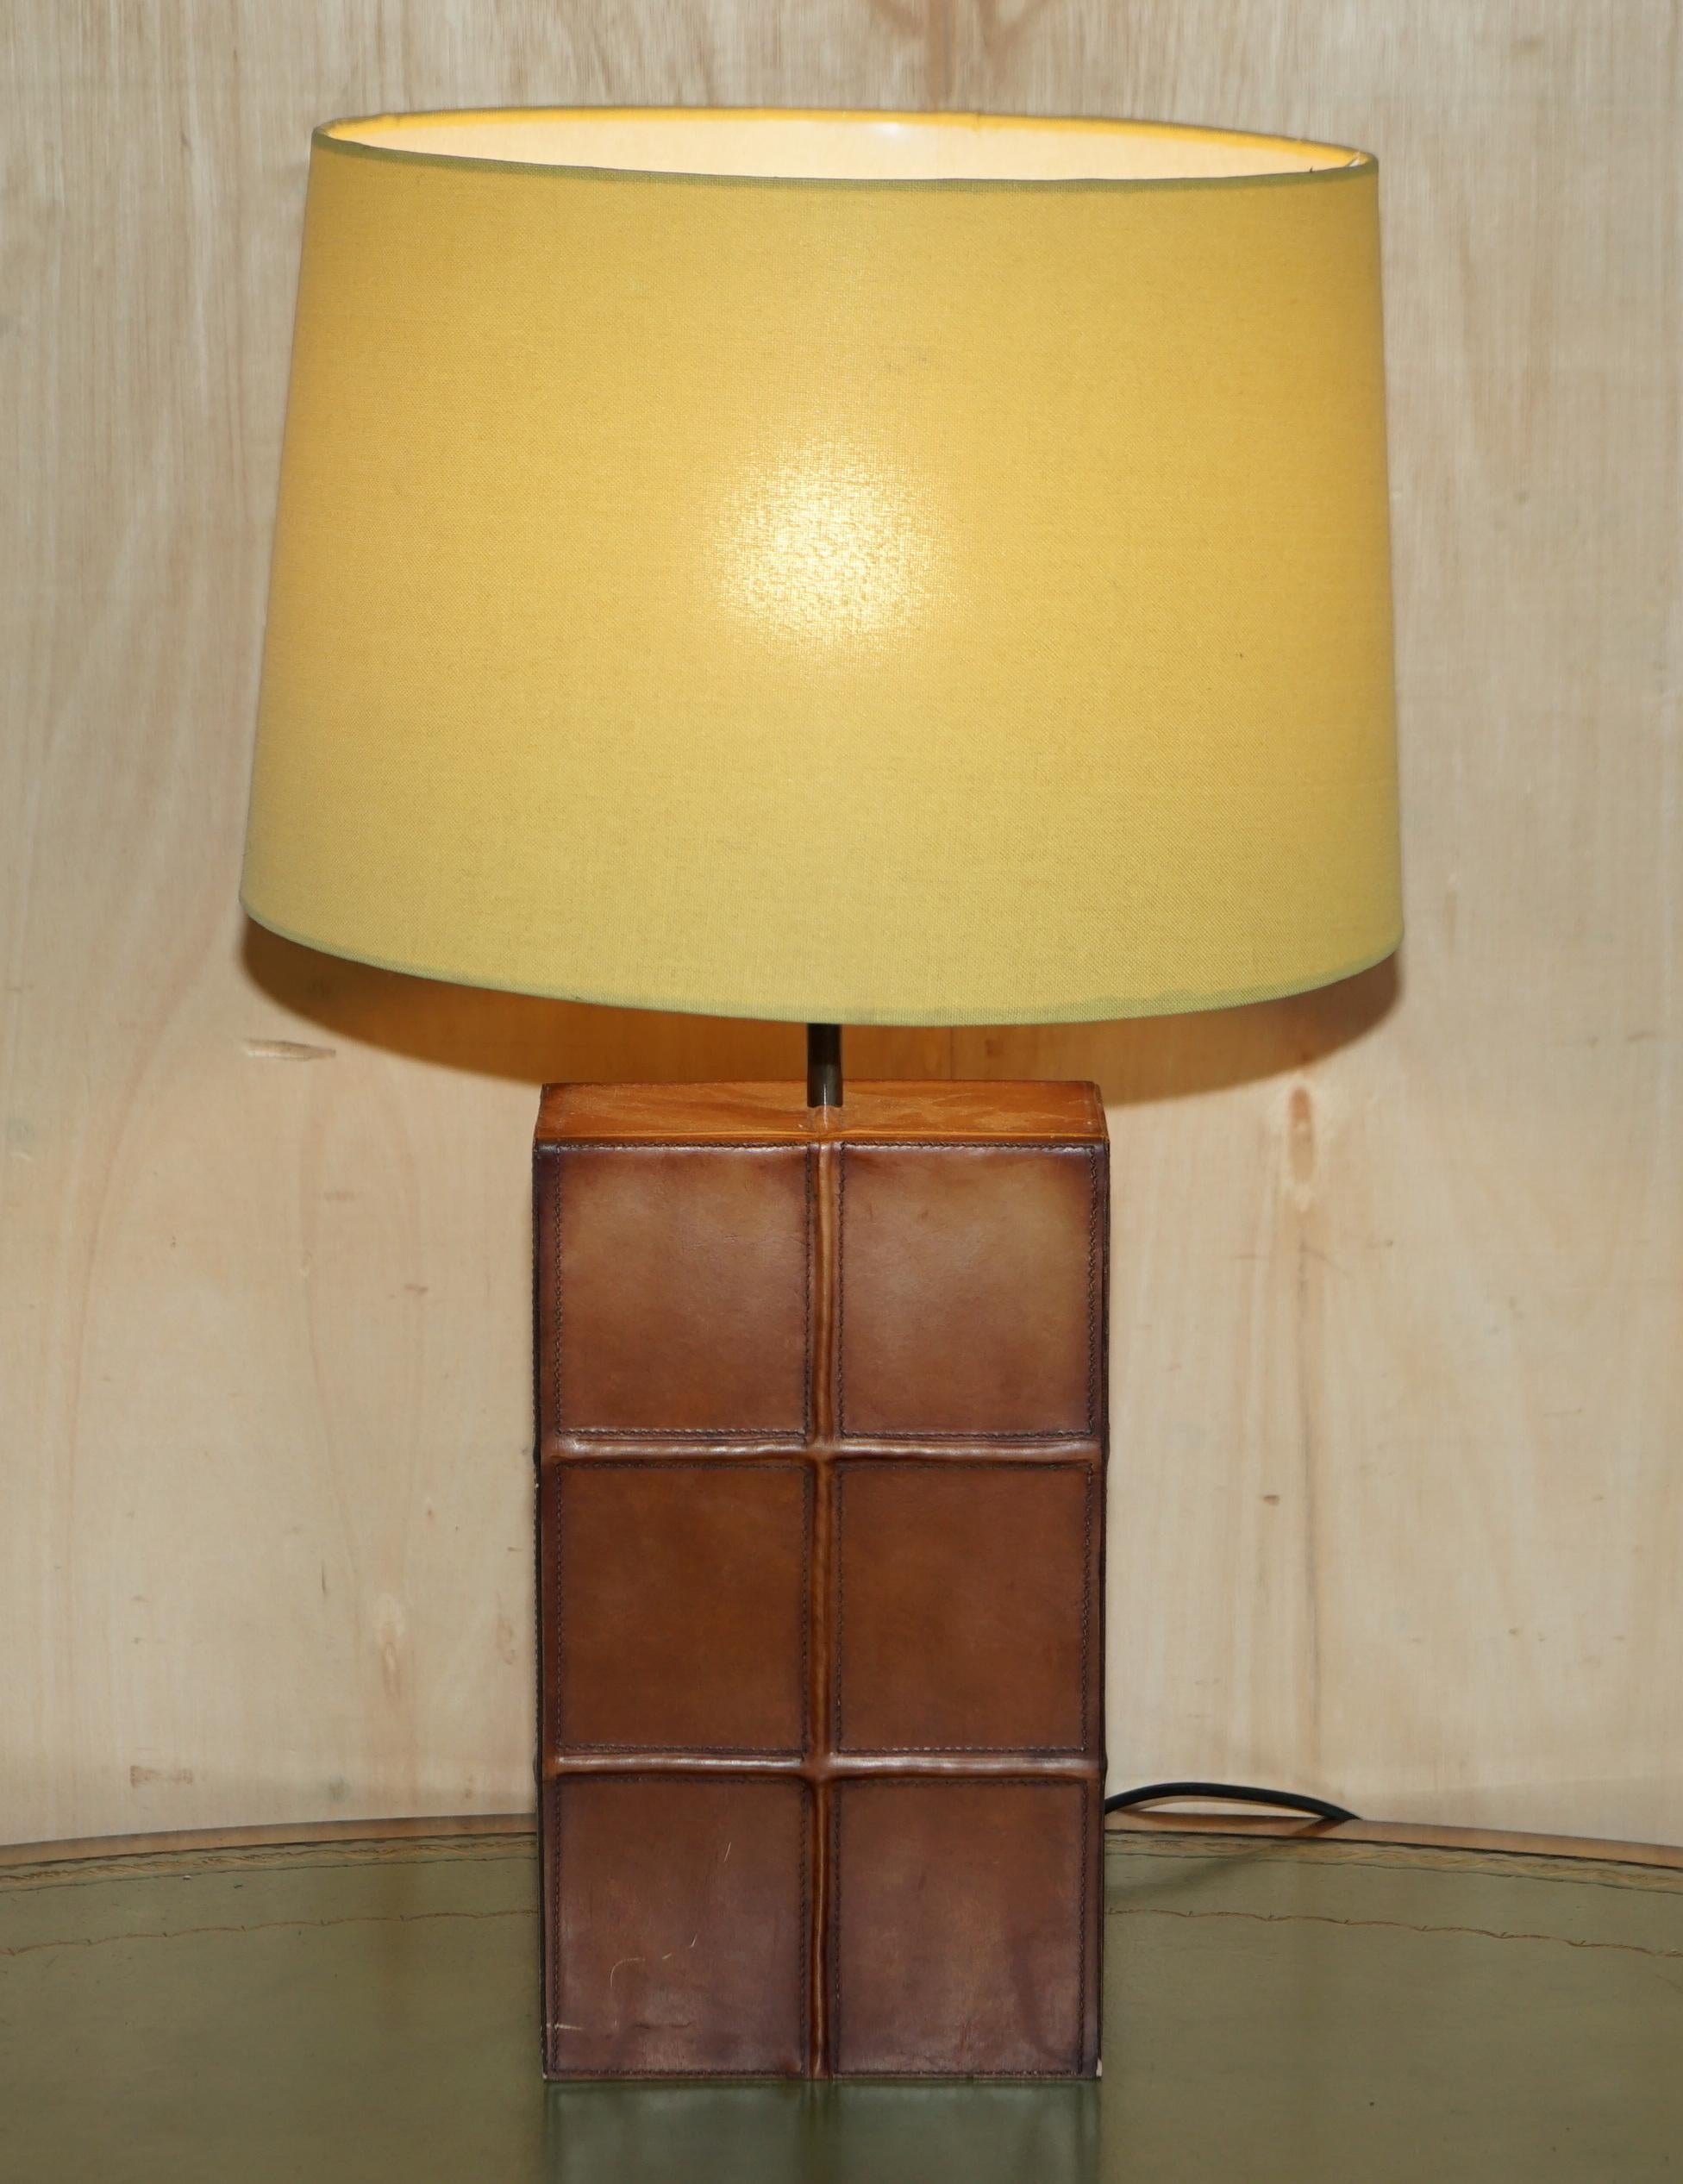 We are delighted to offer for sale this lovely hand stitched brown leather table lamp

I’m now listing around 20 lamps, please check out my other items for all shapes and sizes, they are all pictured with bulbs so you can see them working but the